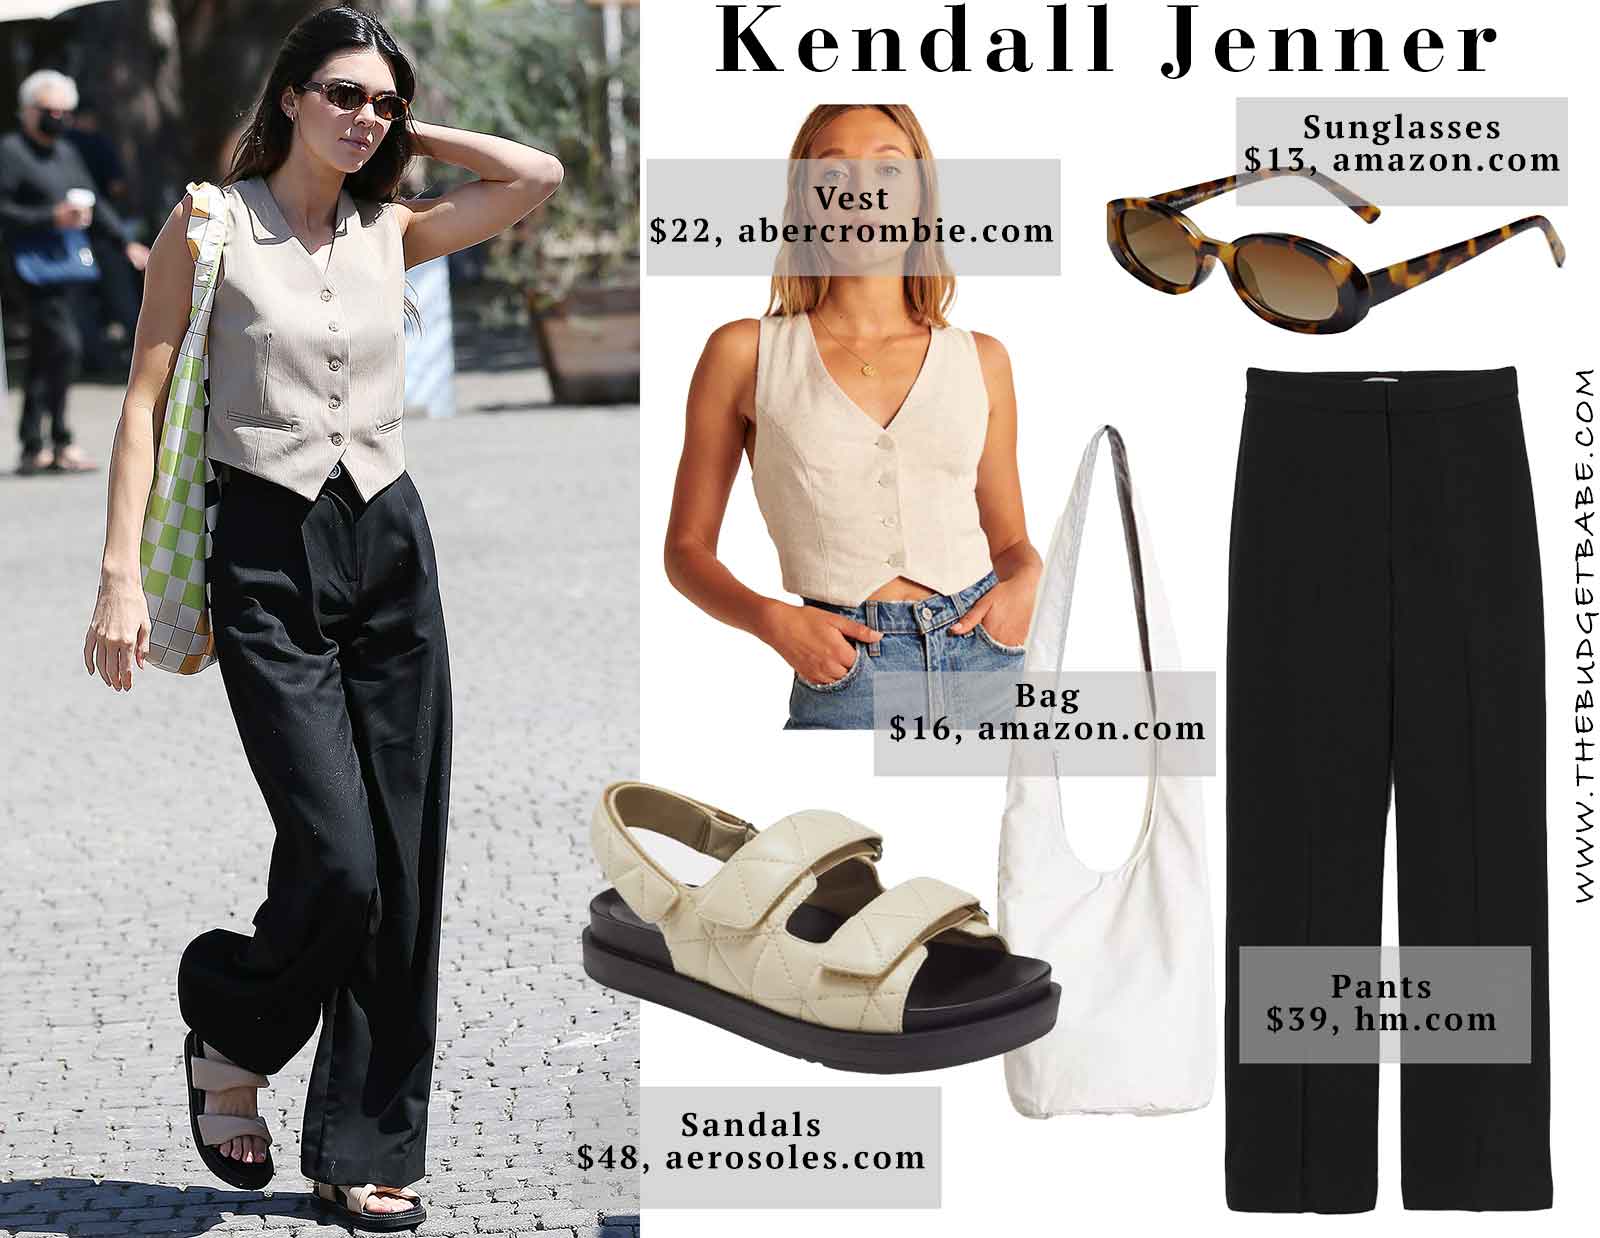 Kendall Jenner is a 90s cutie in a menswear vest and wide leg pants